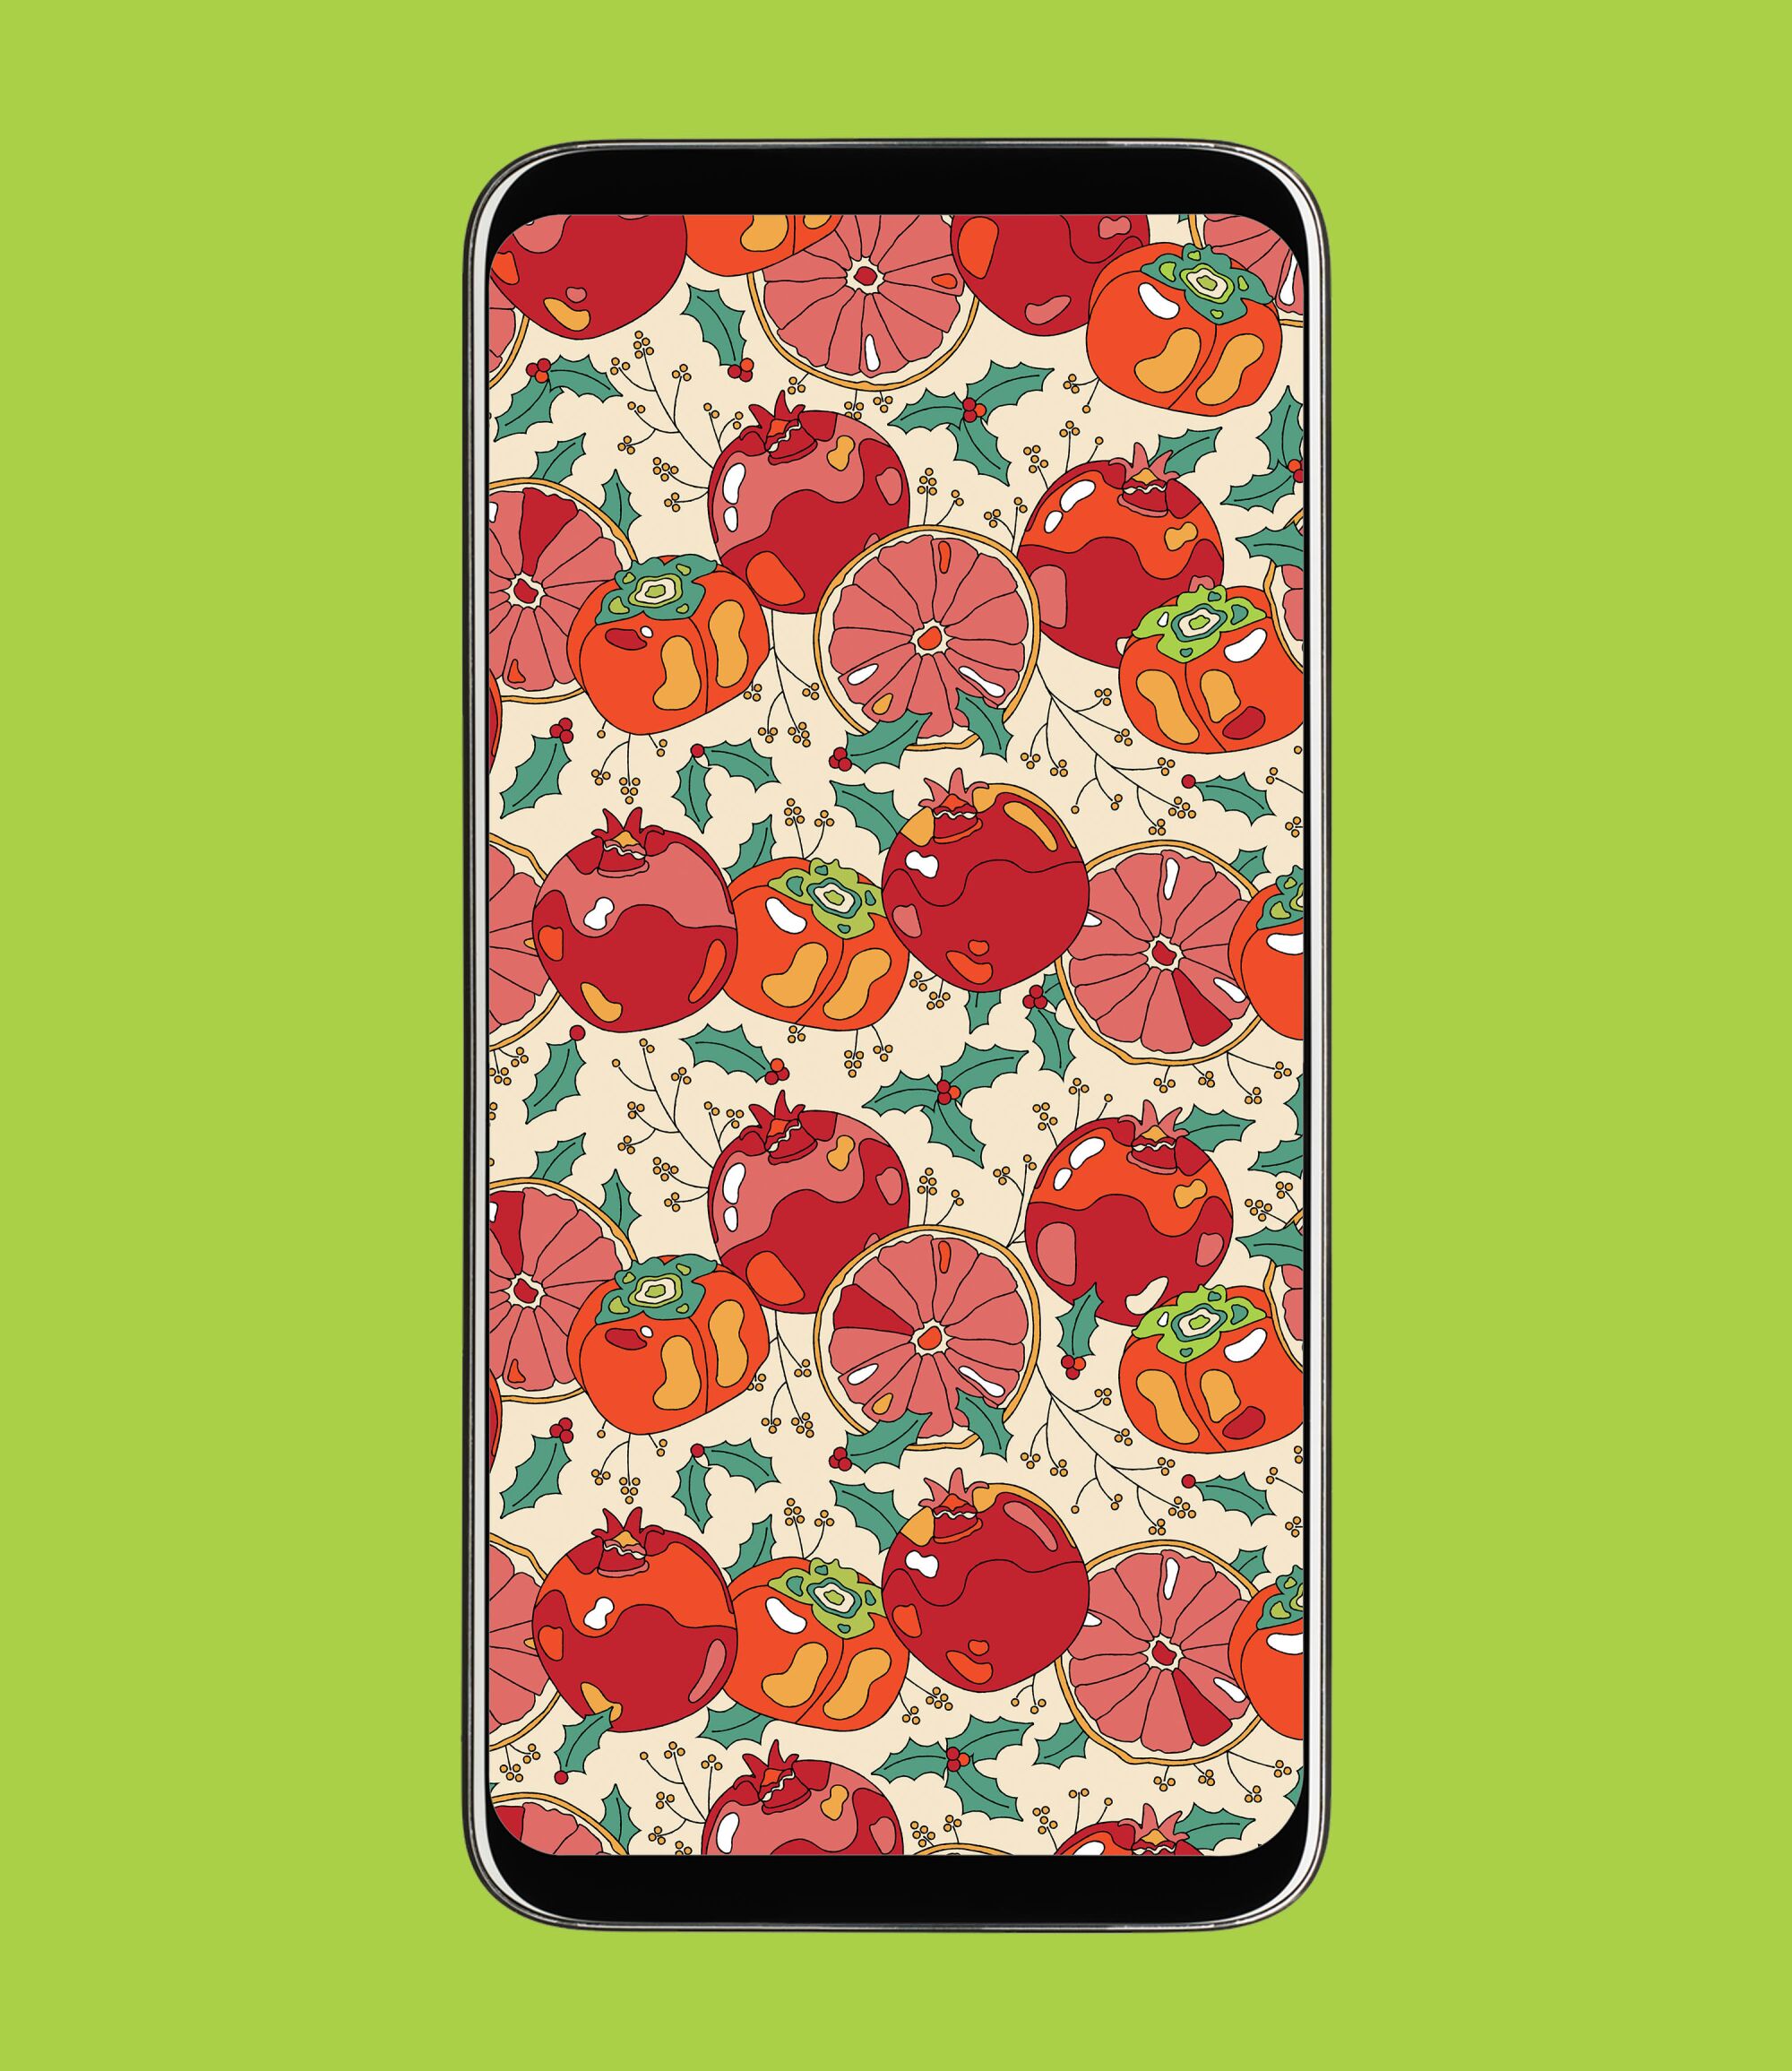 Mockup of a phone background with a pomegranate illustration.